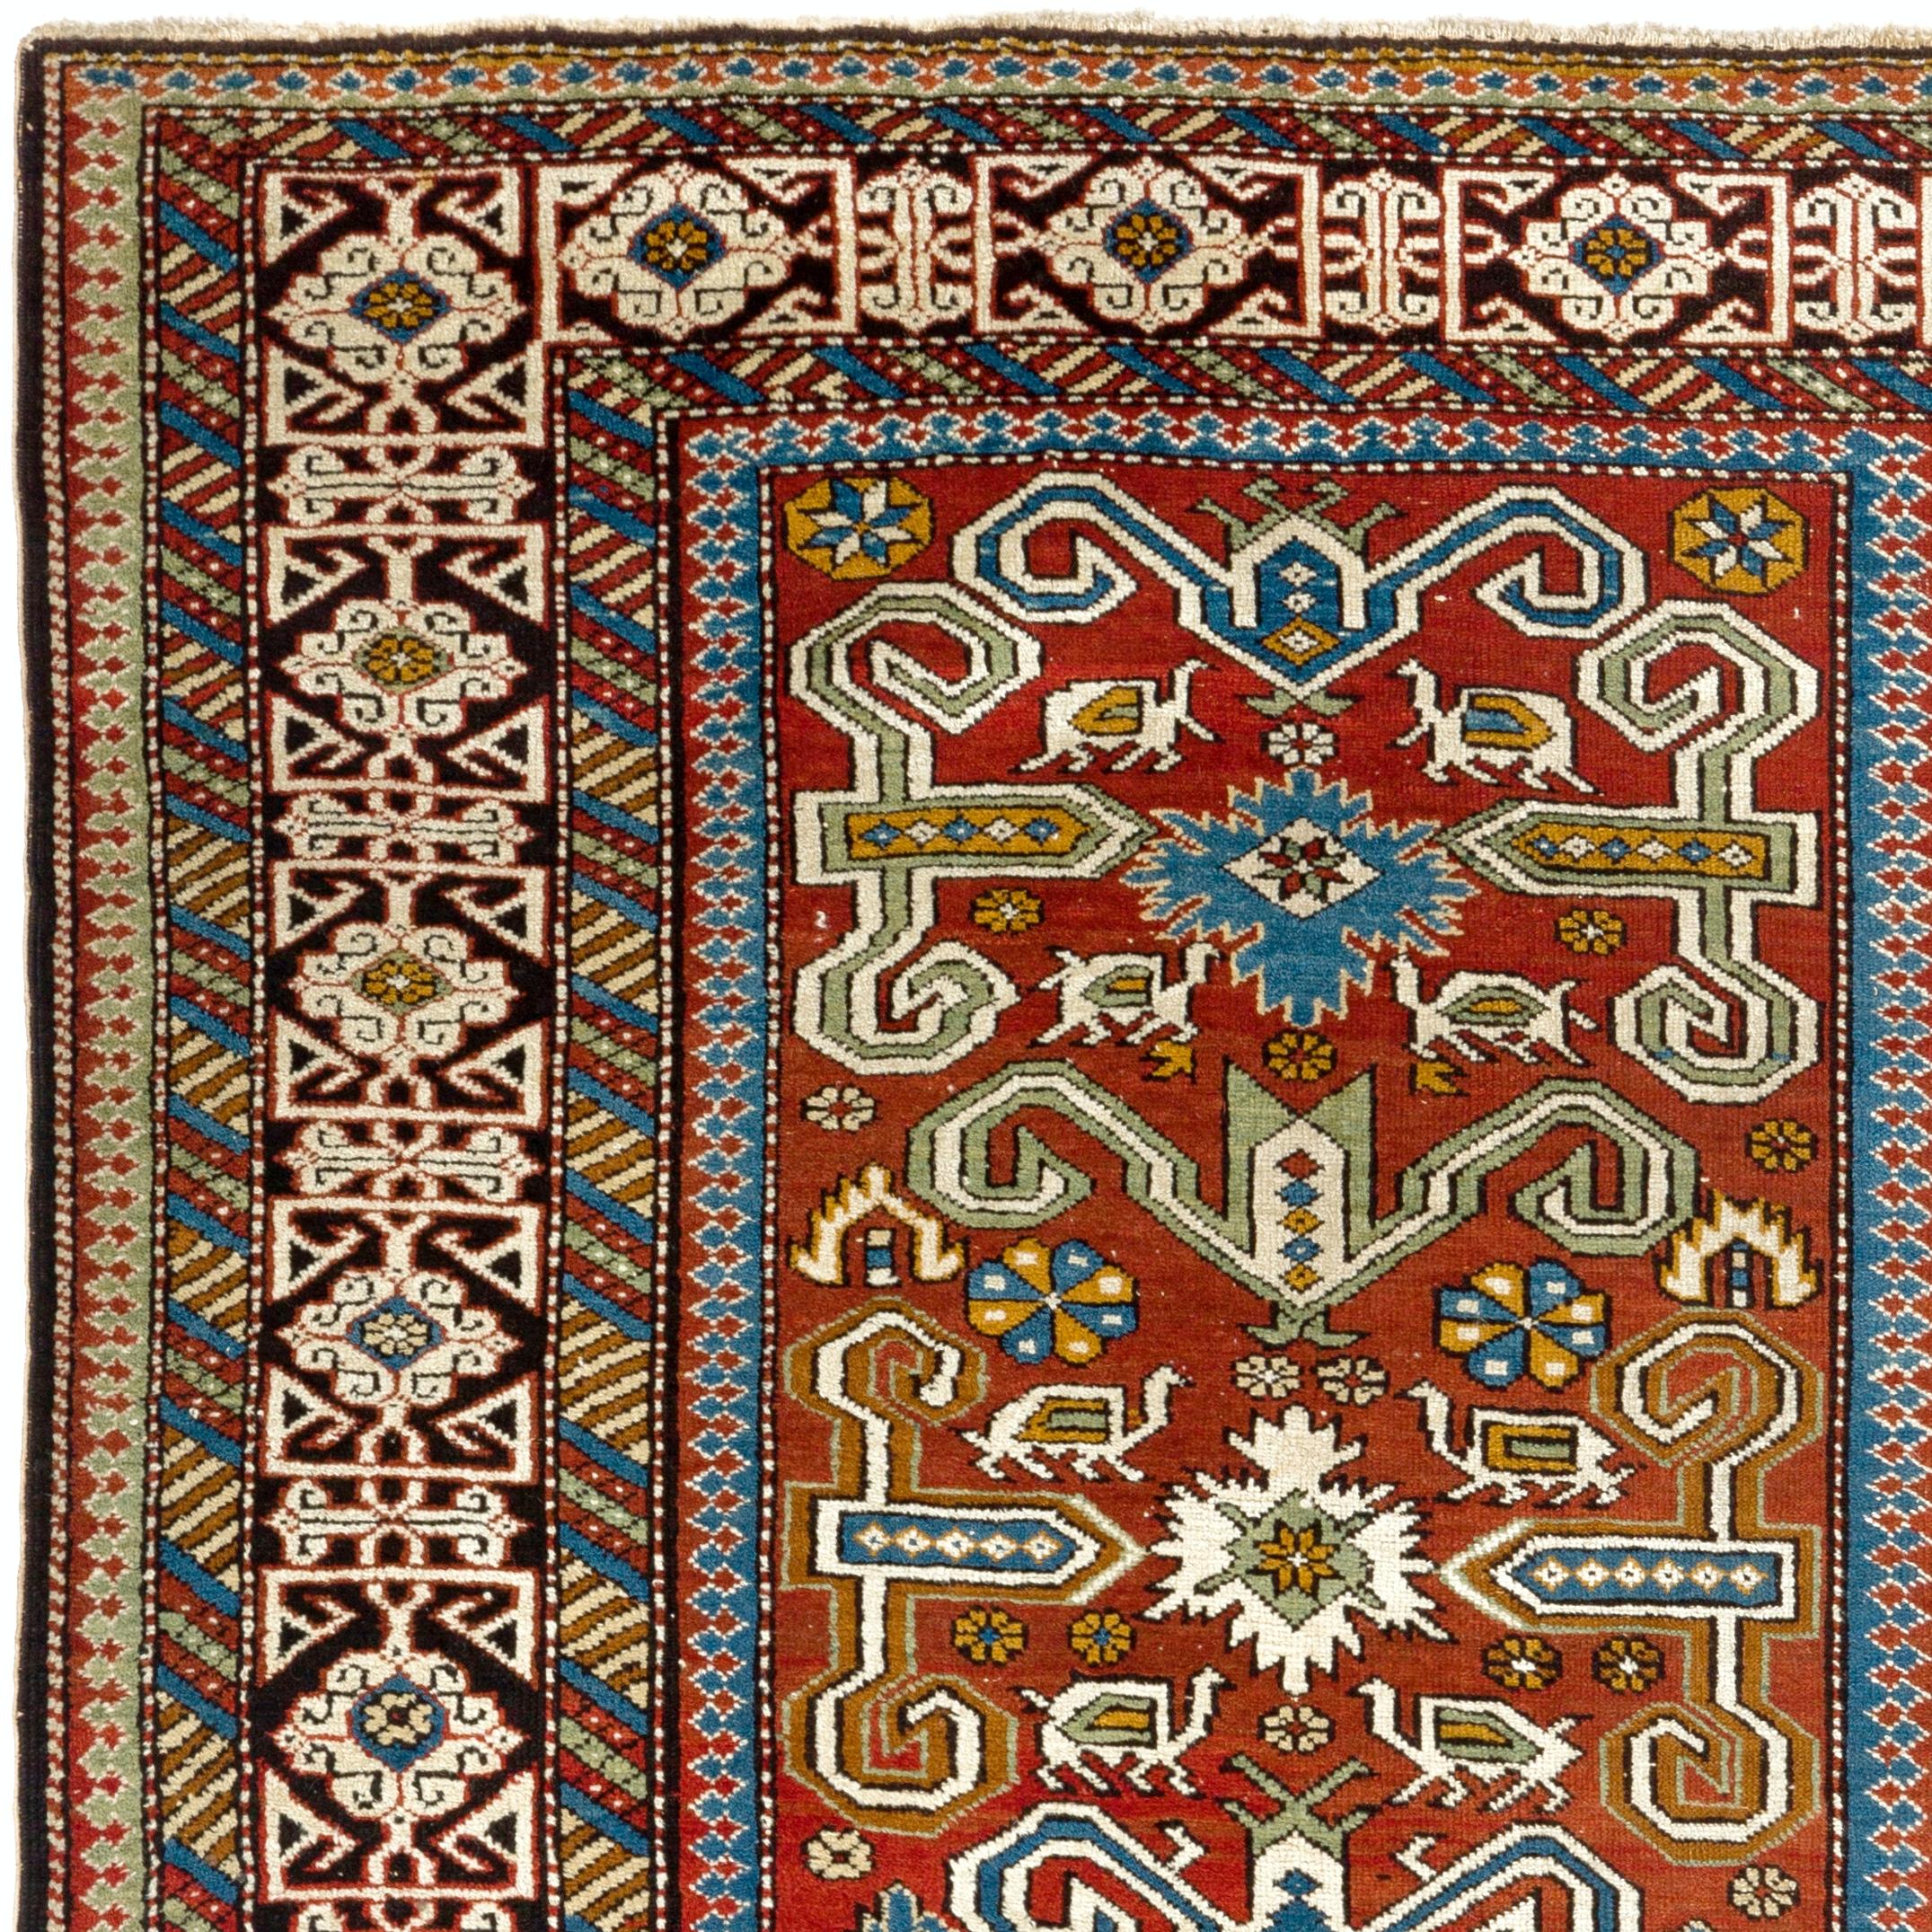 Antique North East Caucasian Perepedil rug from the region of Quba in Azerbaijan. Classic all-over rams horn design with flowers, animals and small stars framed by an elegant Kufic border and colorful minor borders.
Even medium wool pile on cotton